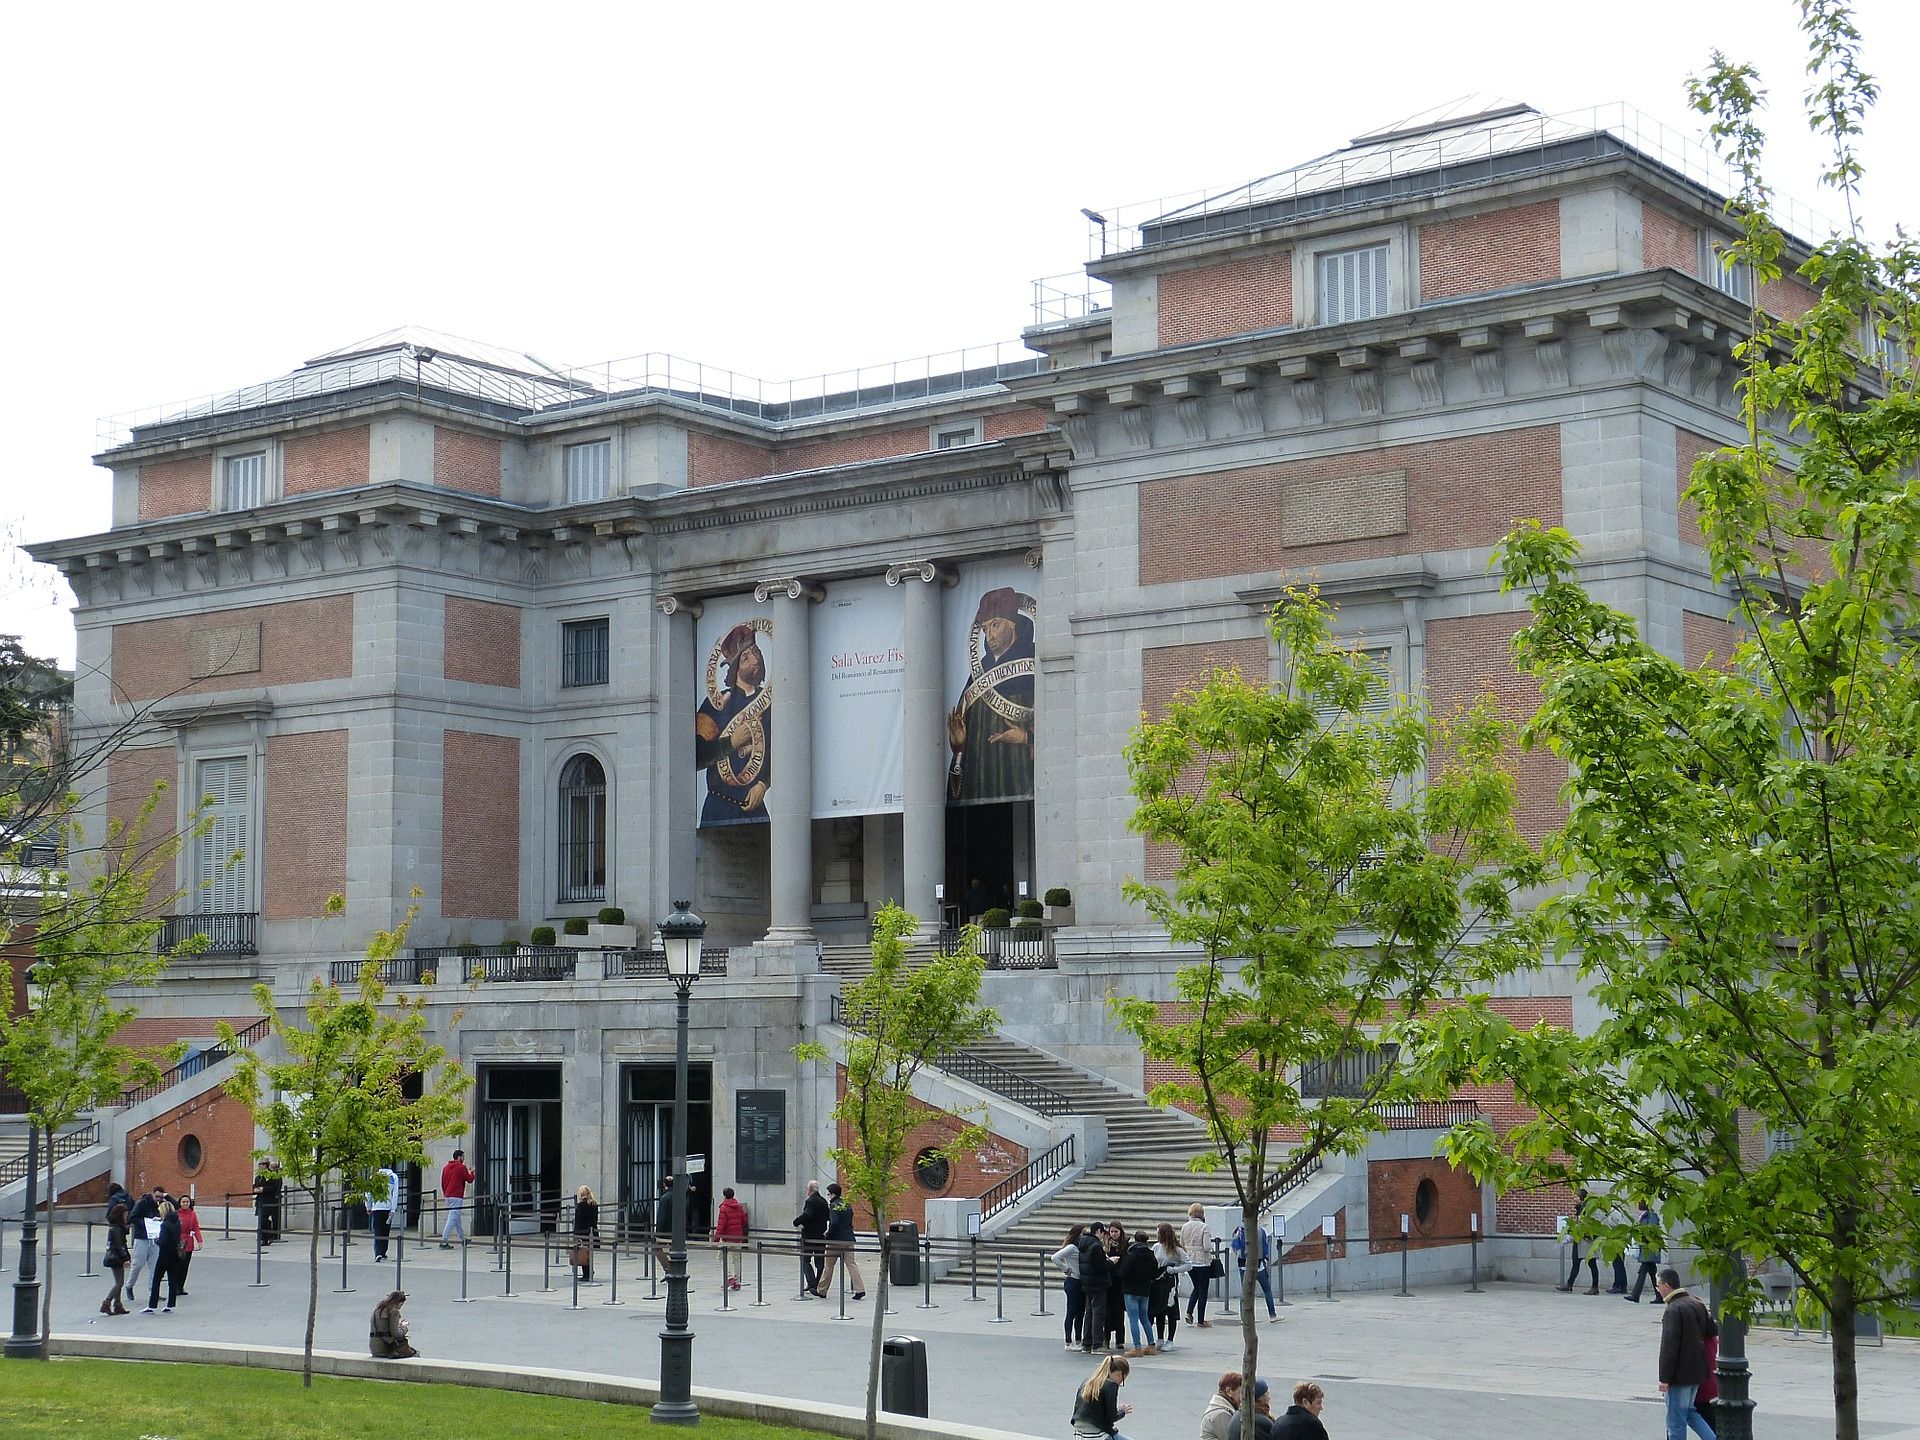 Painted On Stone, Exhibition, National Prado Museum, Madrid: 17 April-5 August 2018